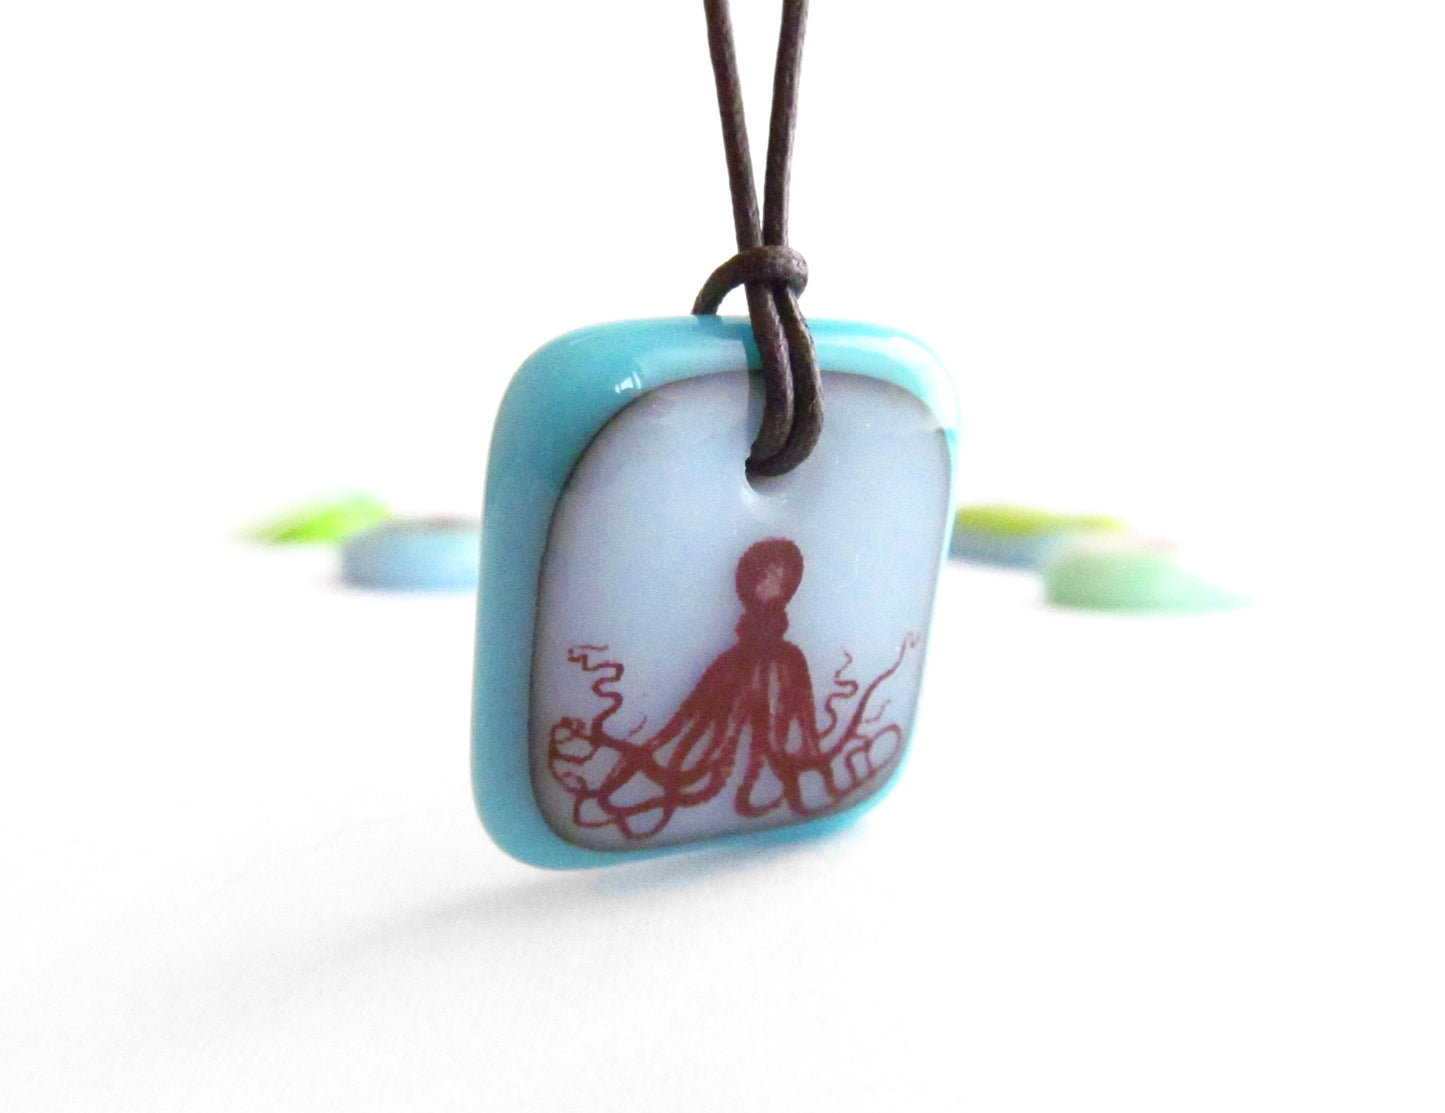 Octopus pendant necklace in turquoise and cloud white colours. 